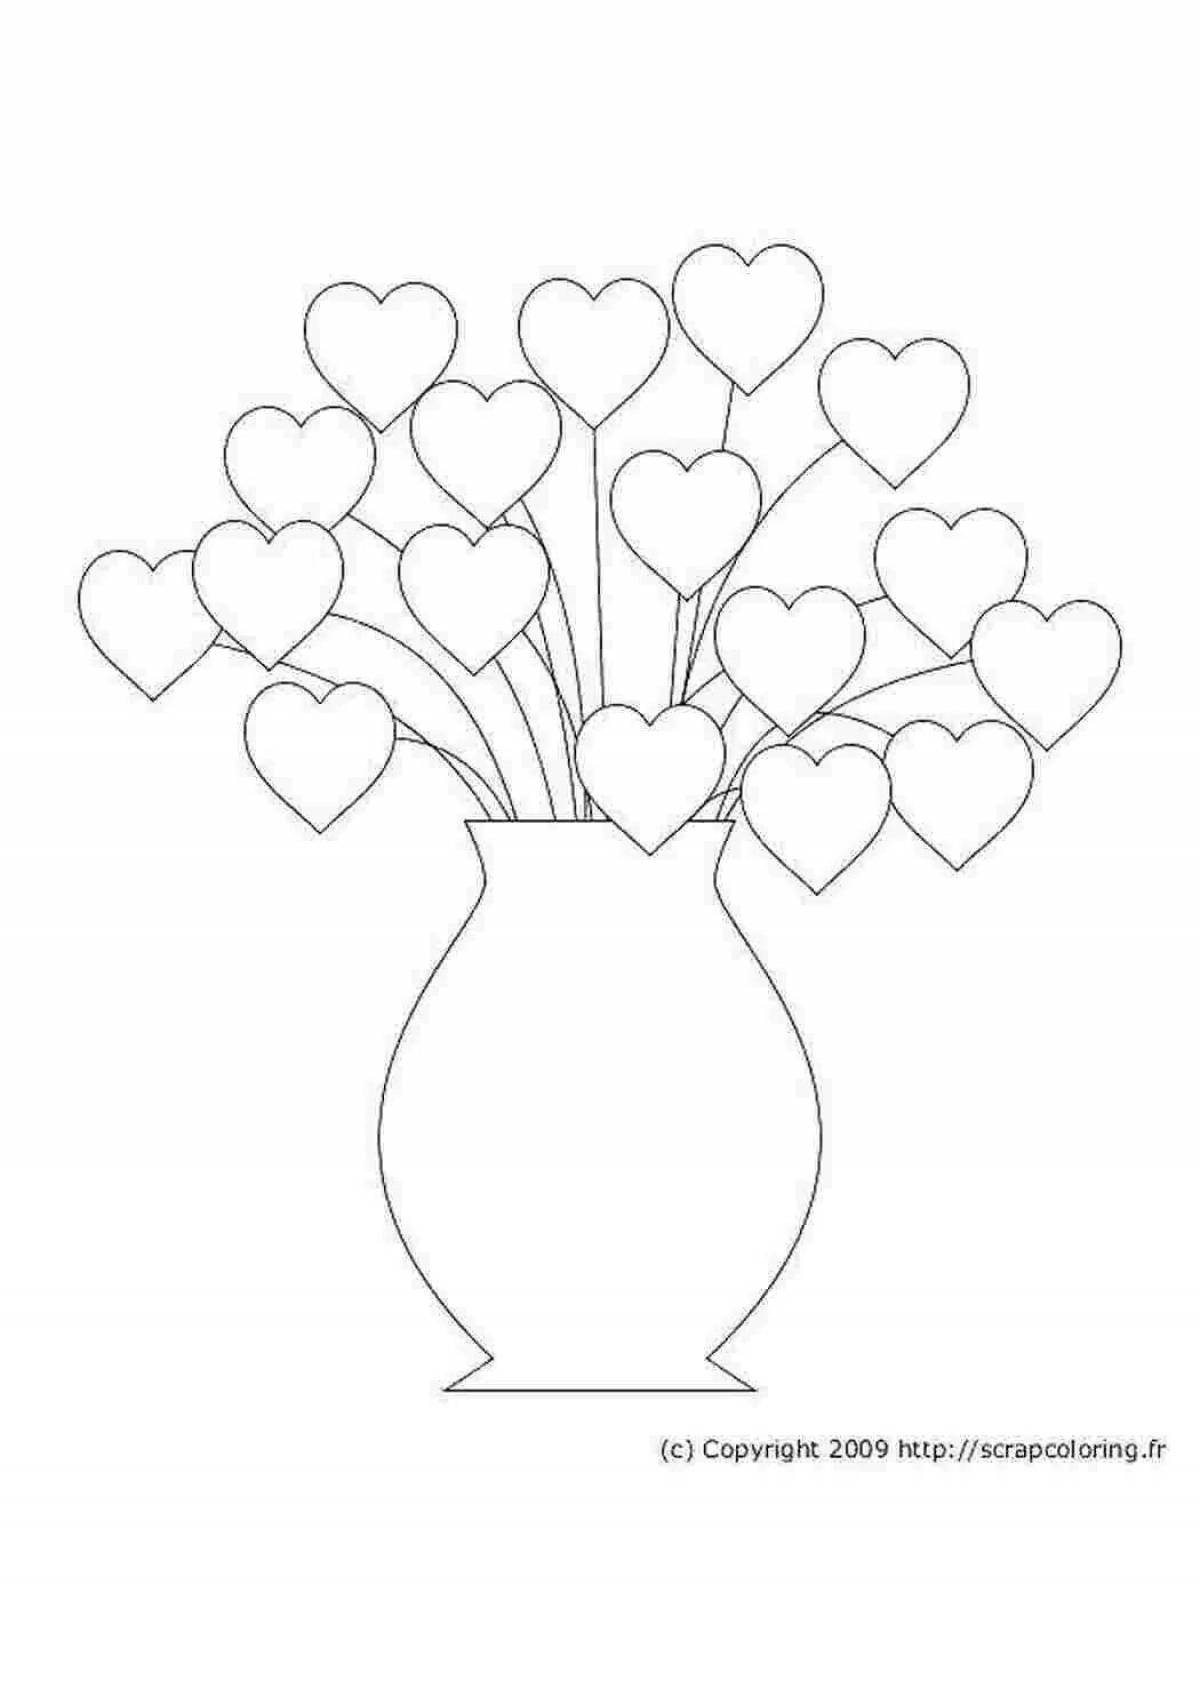 Cute flower vase coloring book for 5-6 year olds